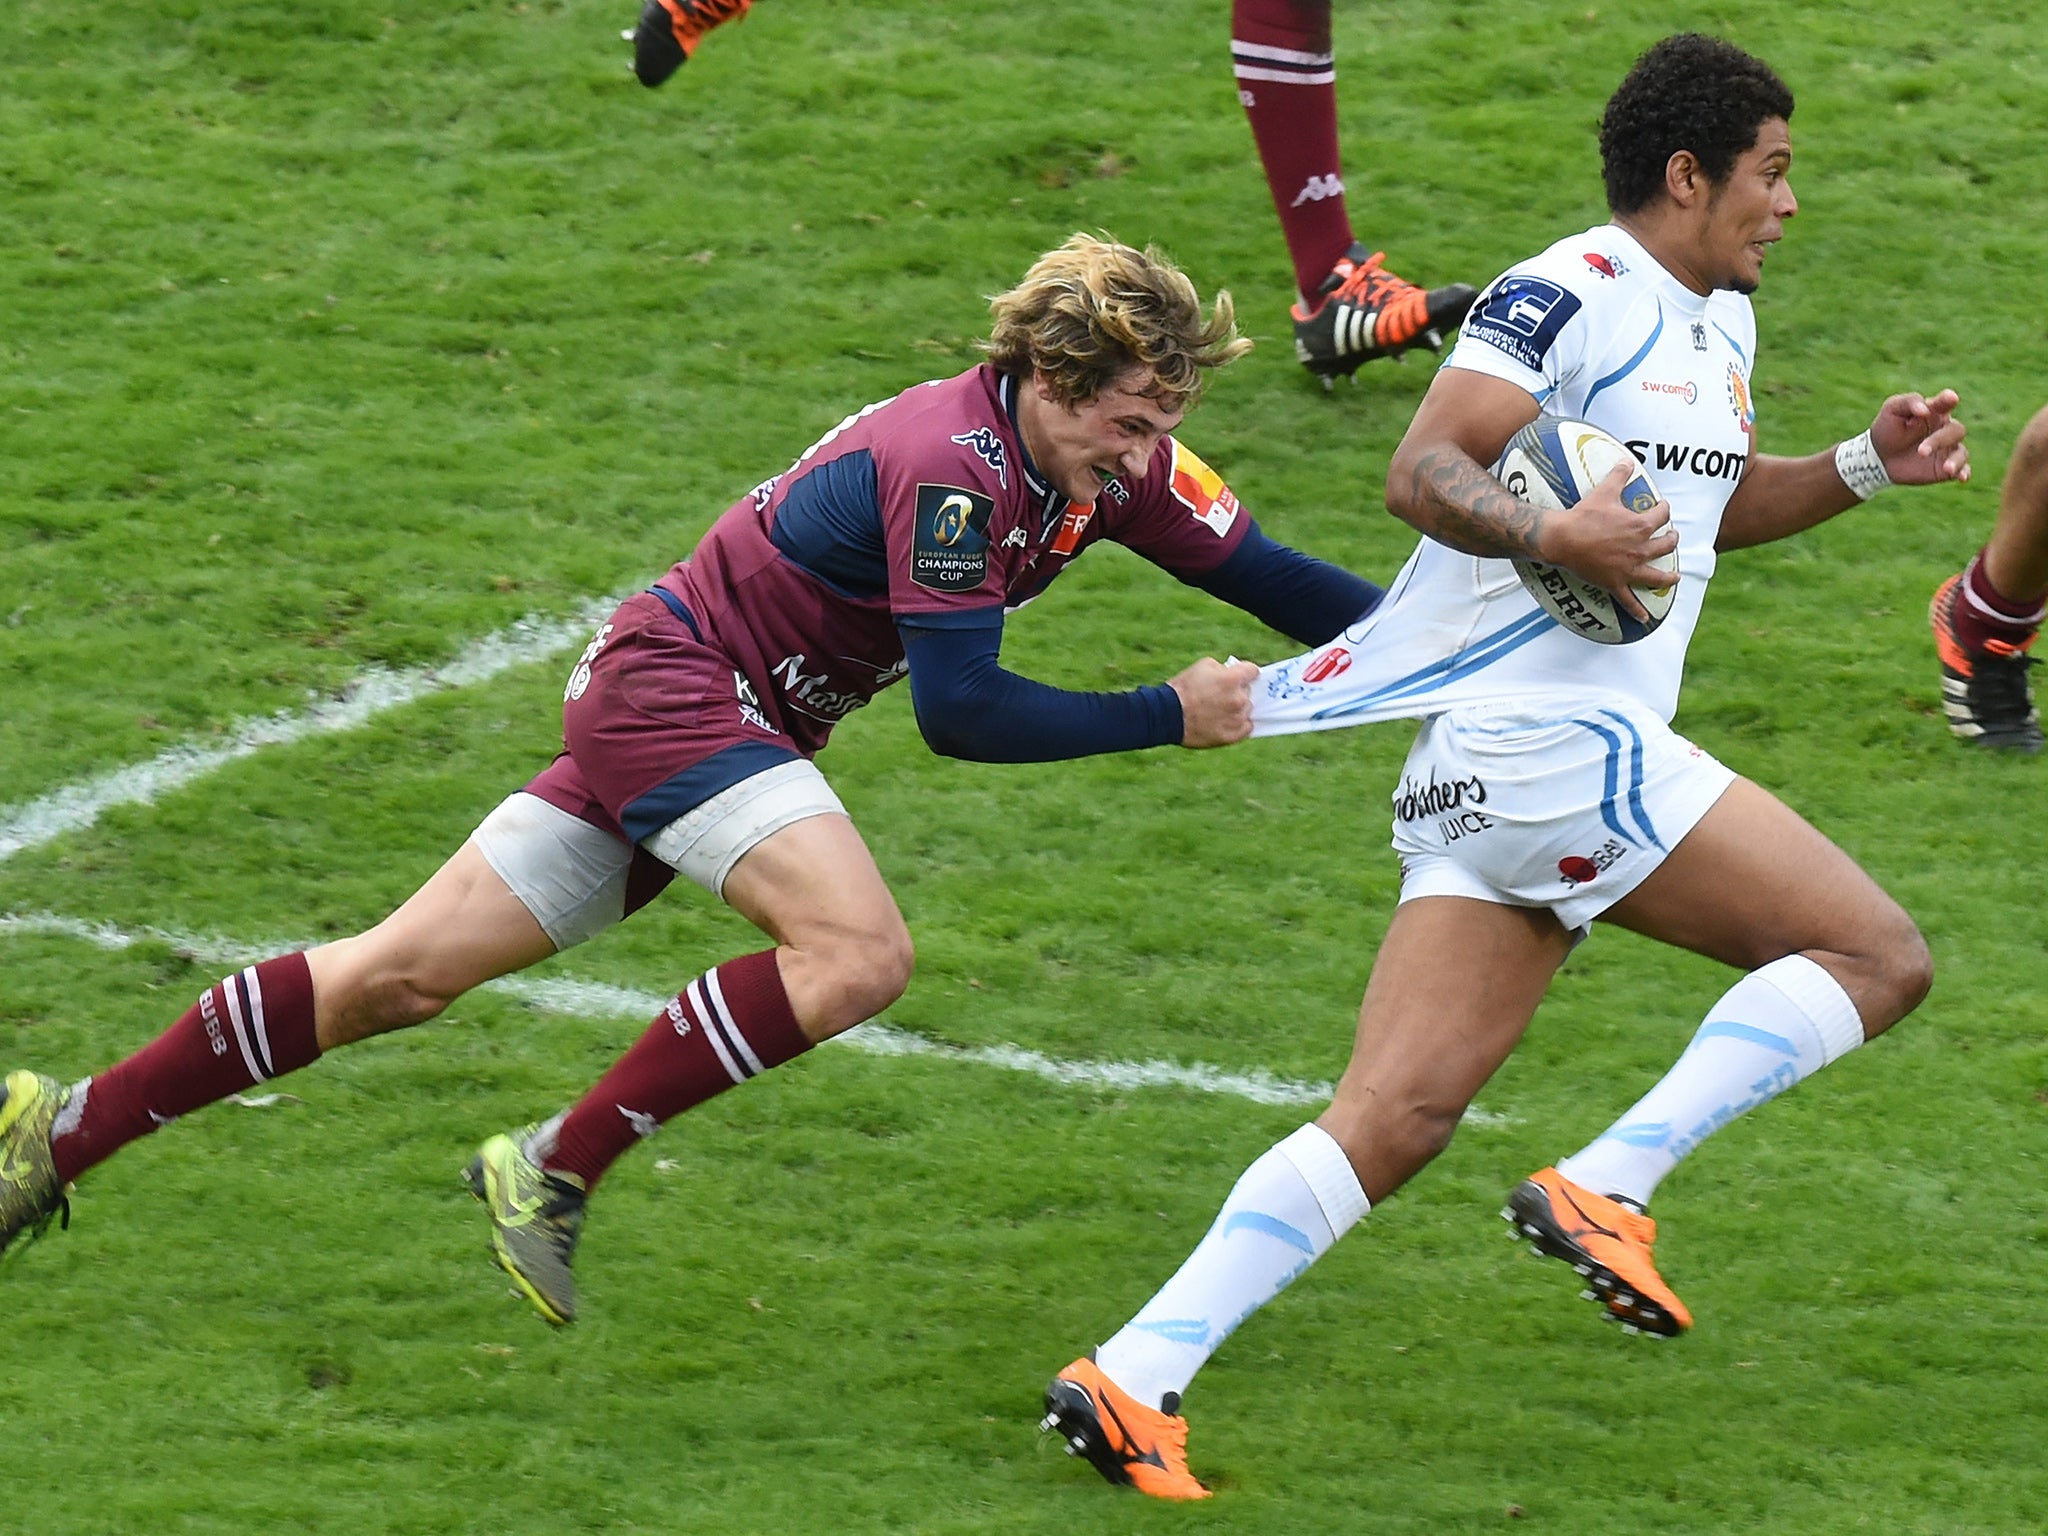 Bordeaux's Baptiste Serin (L) tackles Exeter's Botha Chrysander (R) during the European Champions Cup